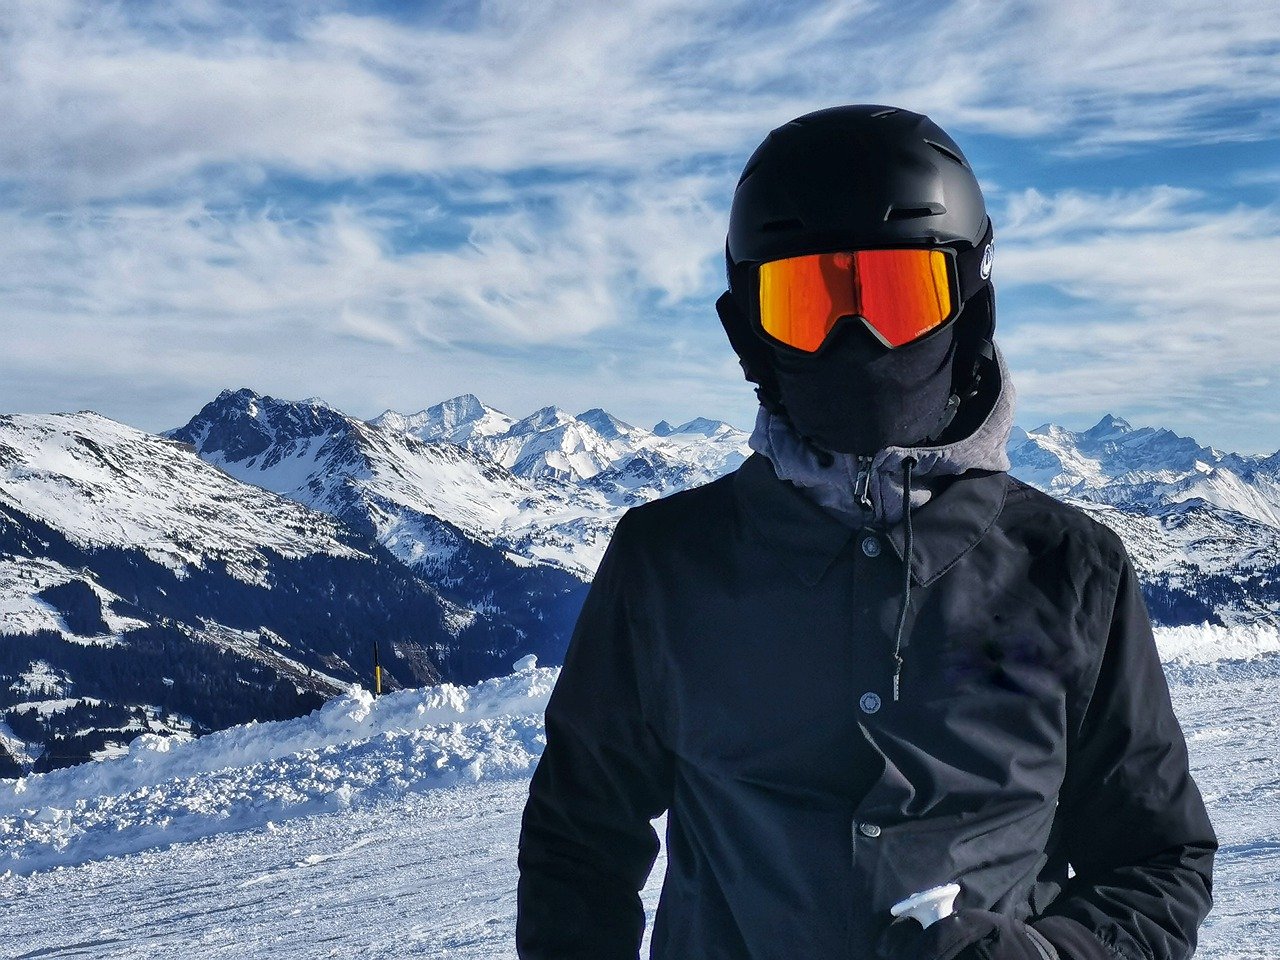 Skier wearing a helmet, goggles, neck gaiter, and layers of clothing